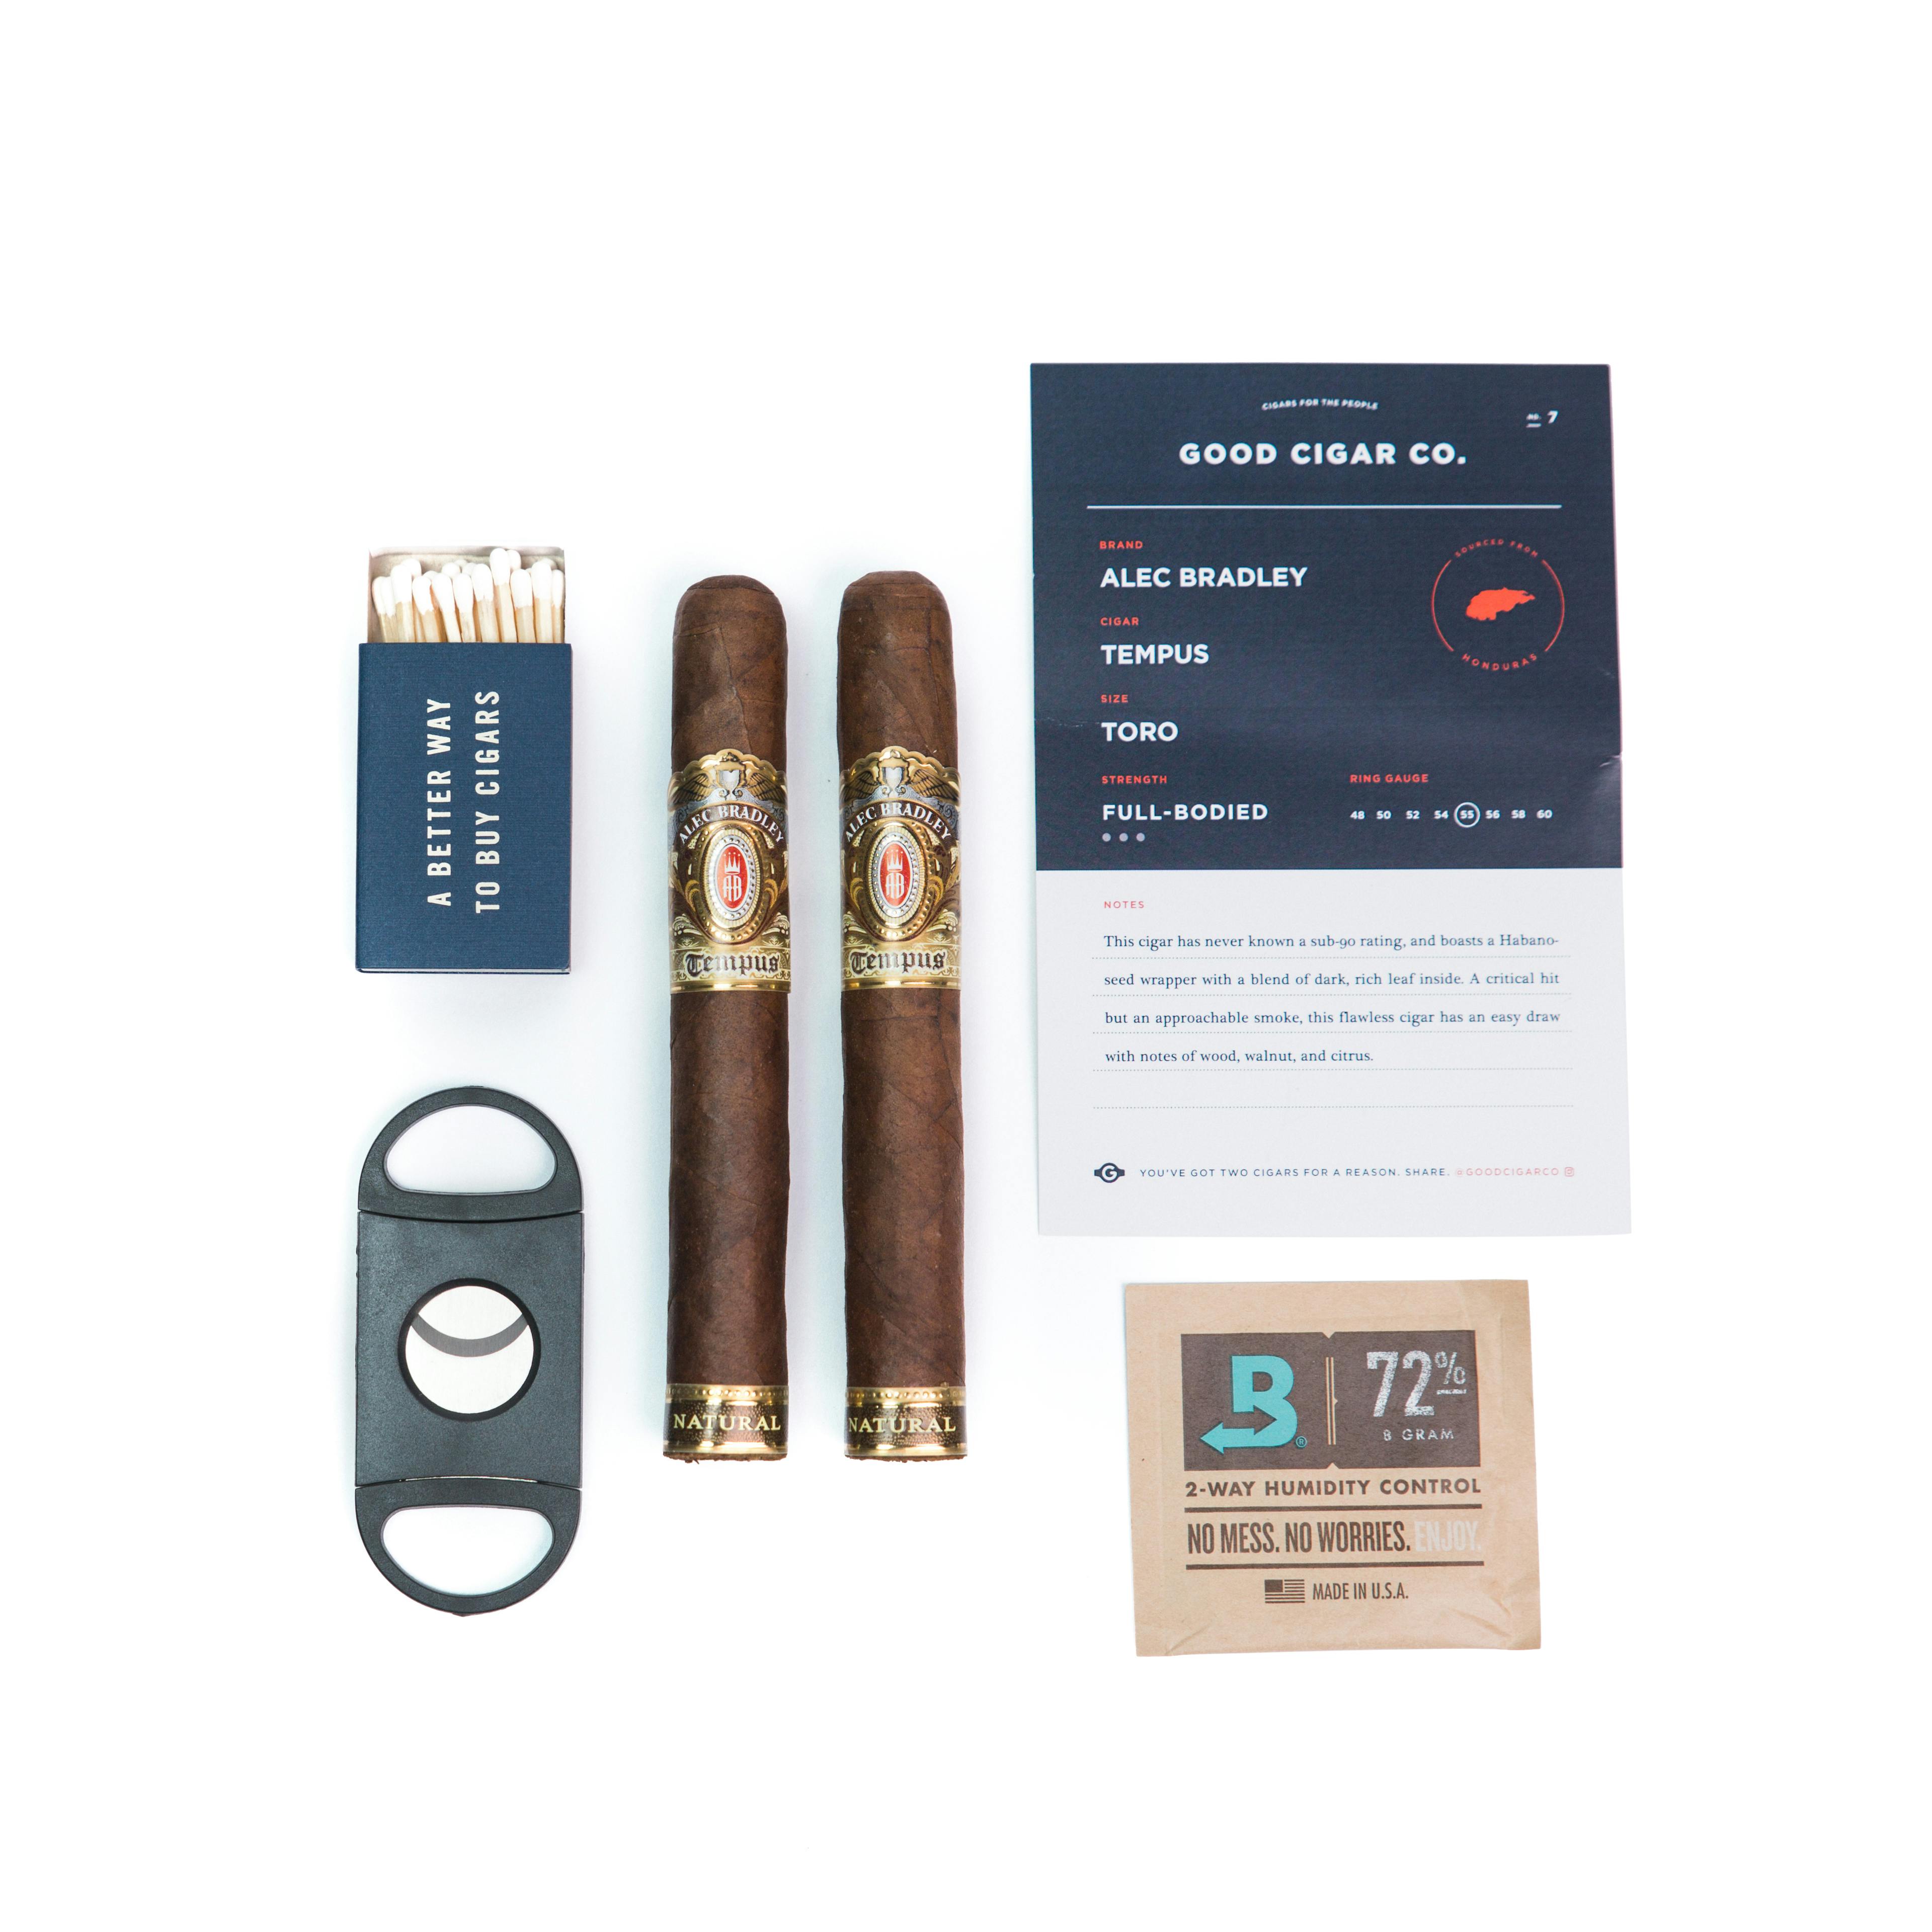 Good Cigar Co. 2 Pack of Cigars - Rove (Full-bodied)